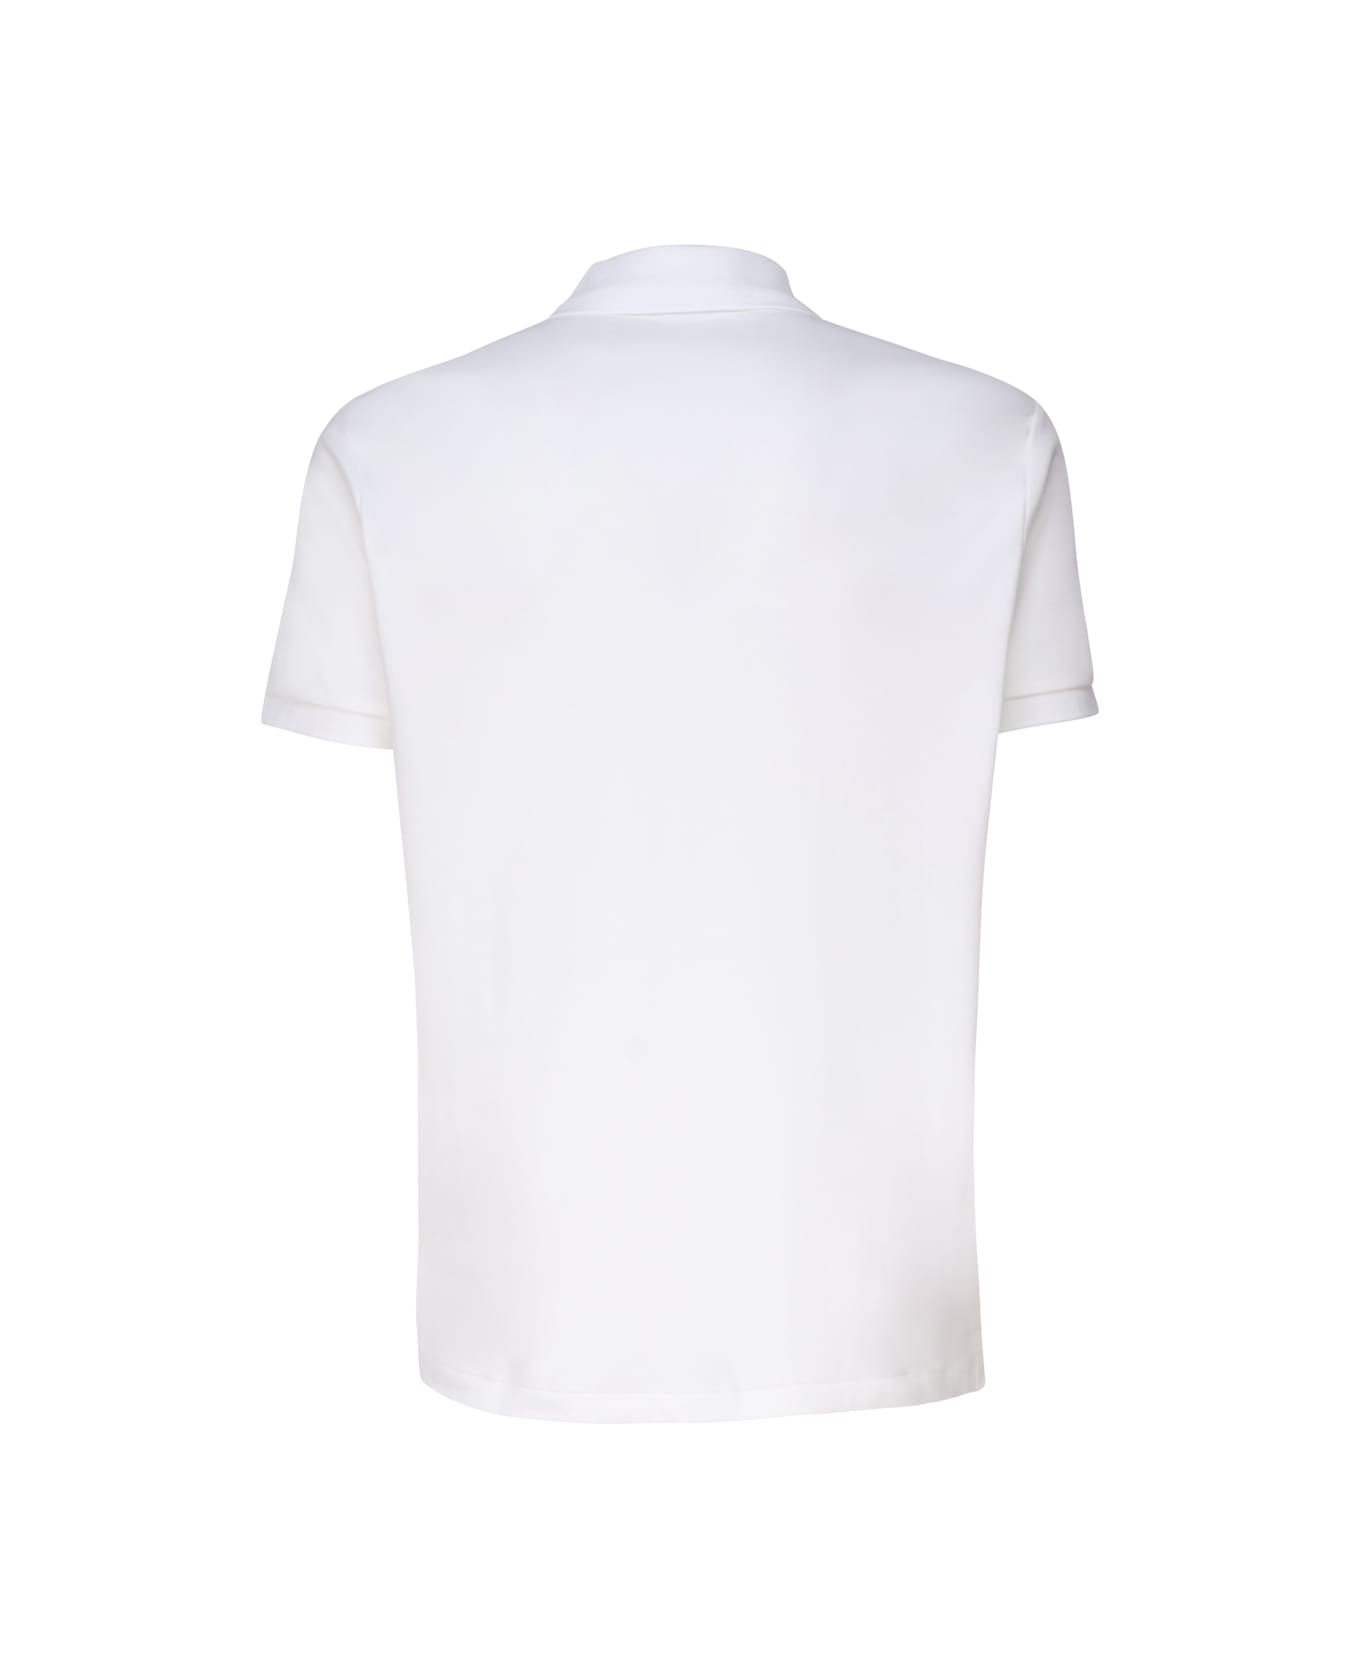 Polo Ralph Lauren Polo Shirt With Embroidery - White